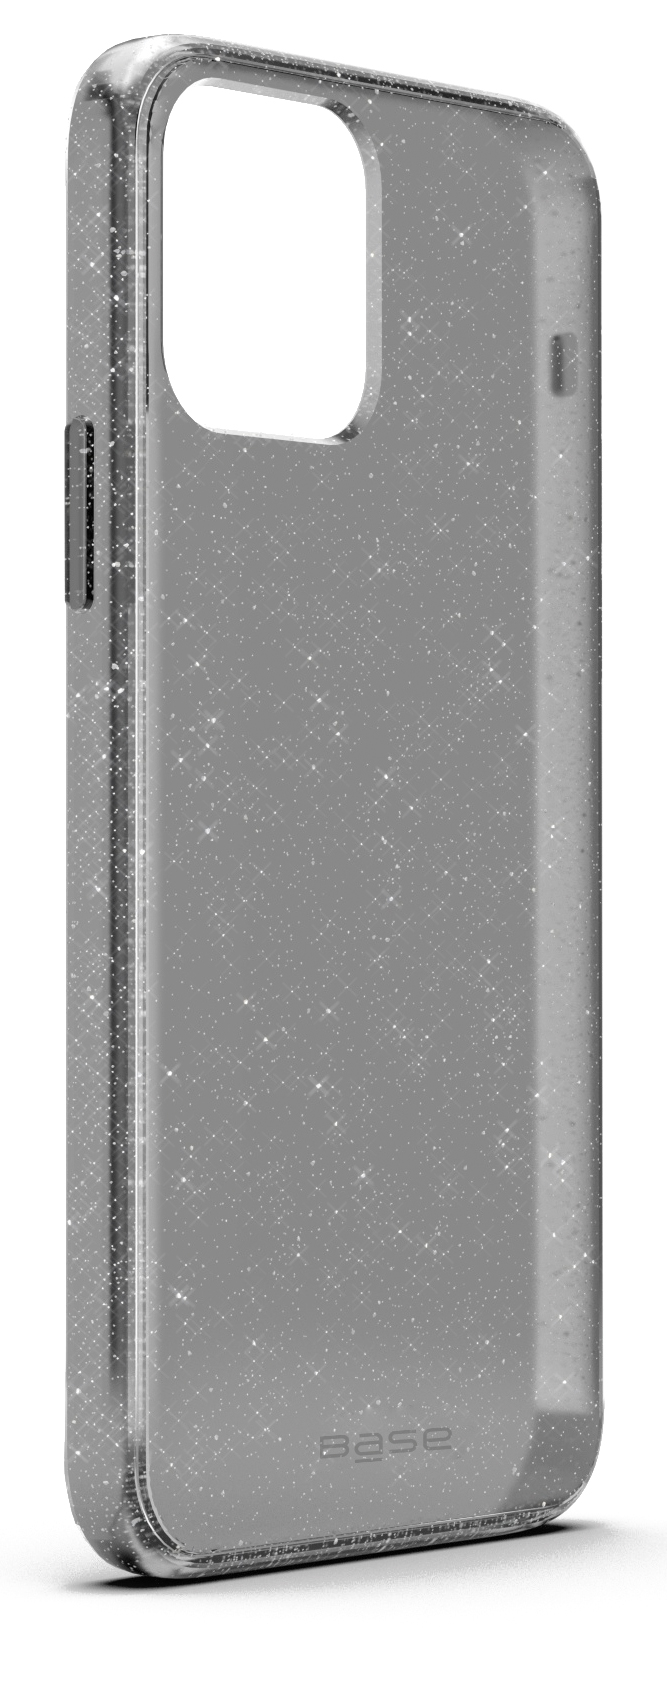 Base Crystalline Case for iPhone 13 - Gray (Limited Edition)